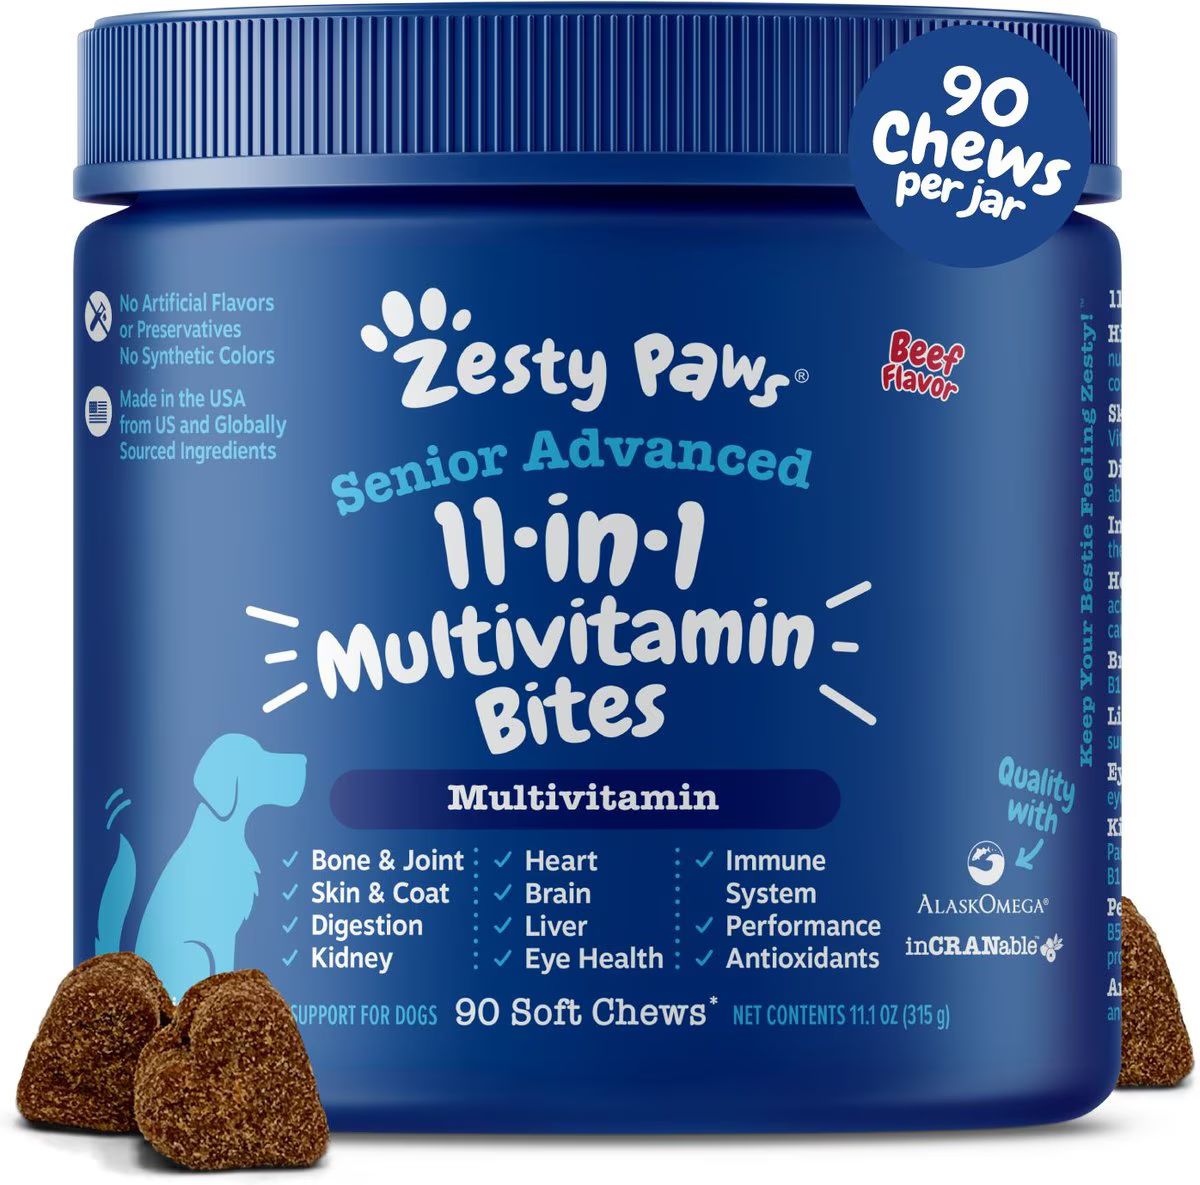 Zesty Paws Senior Advanced 11-in-1 Bites Beef Flavored Soft Chews Multivitamin Supplement for Sen... | Chewy.com